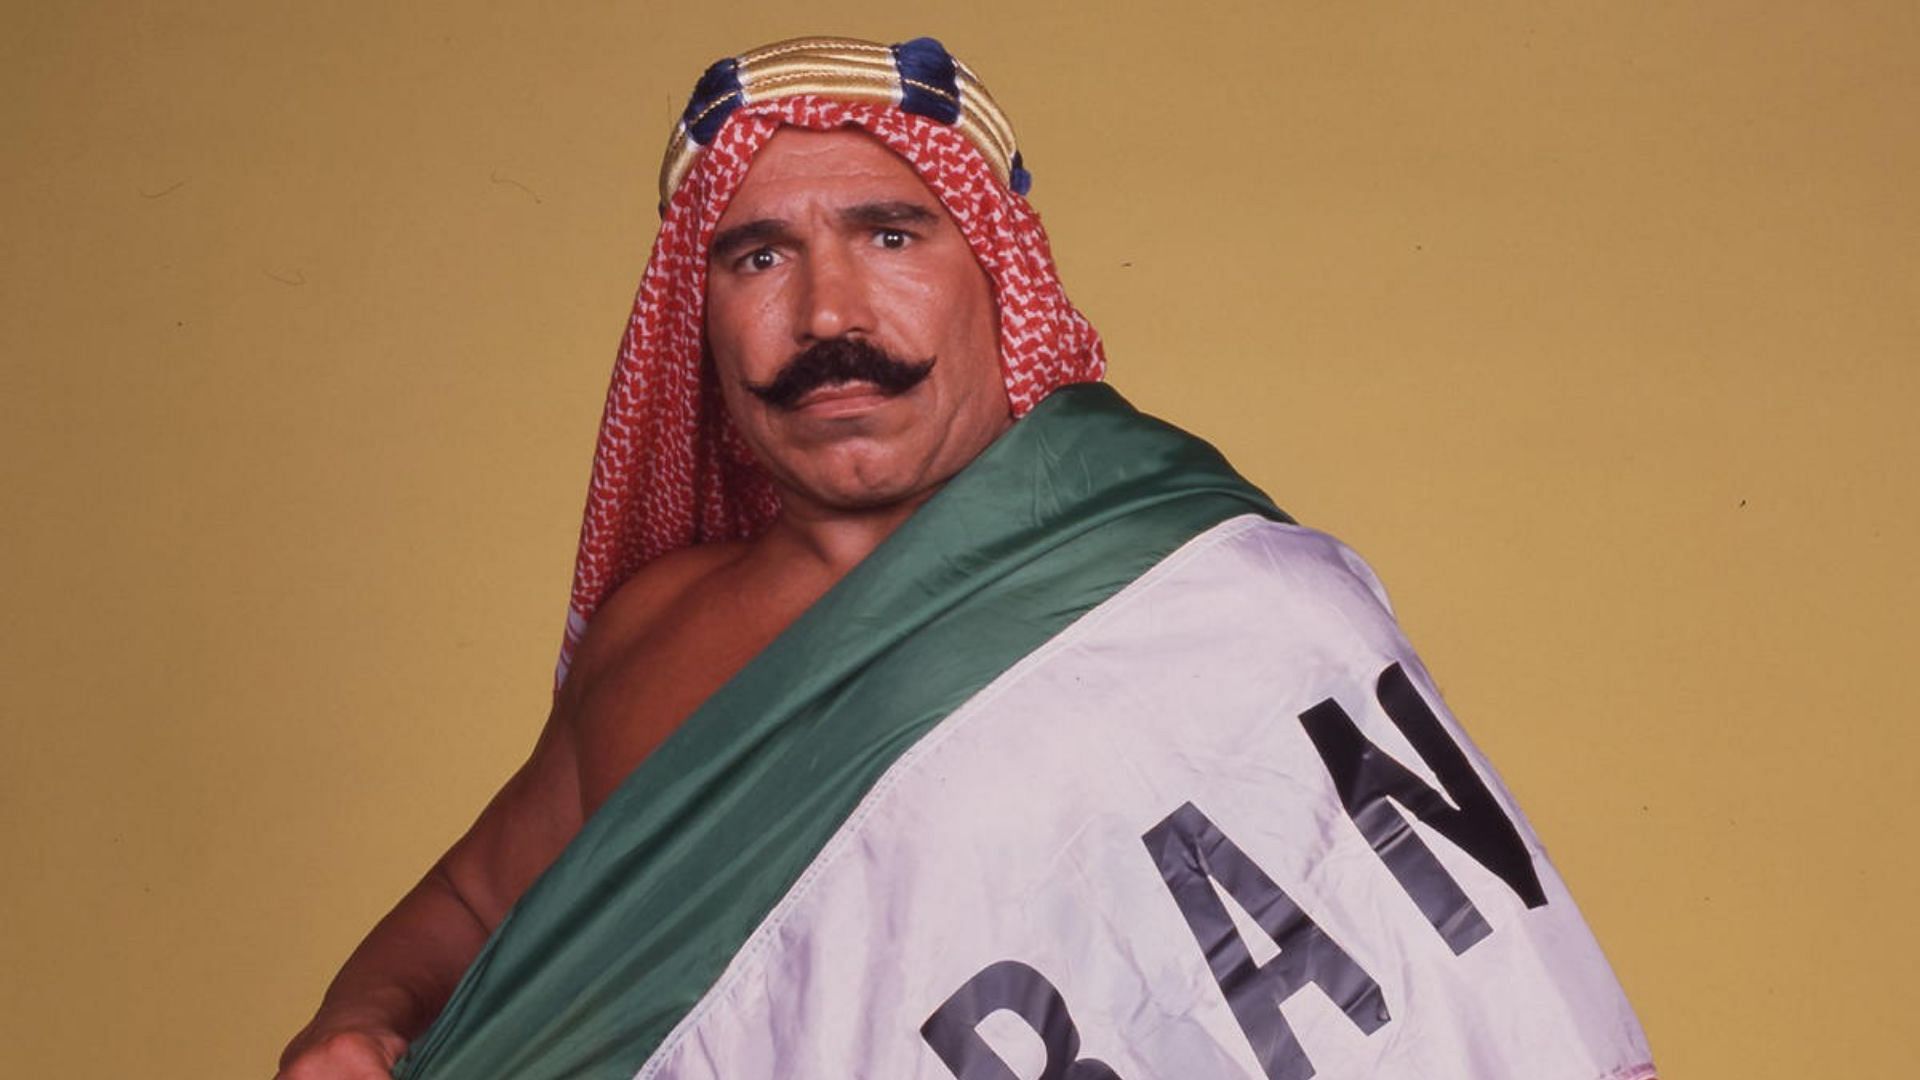 The Iron Sheik was one of WWE